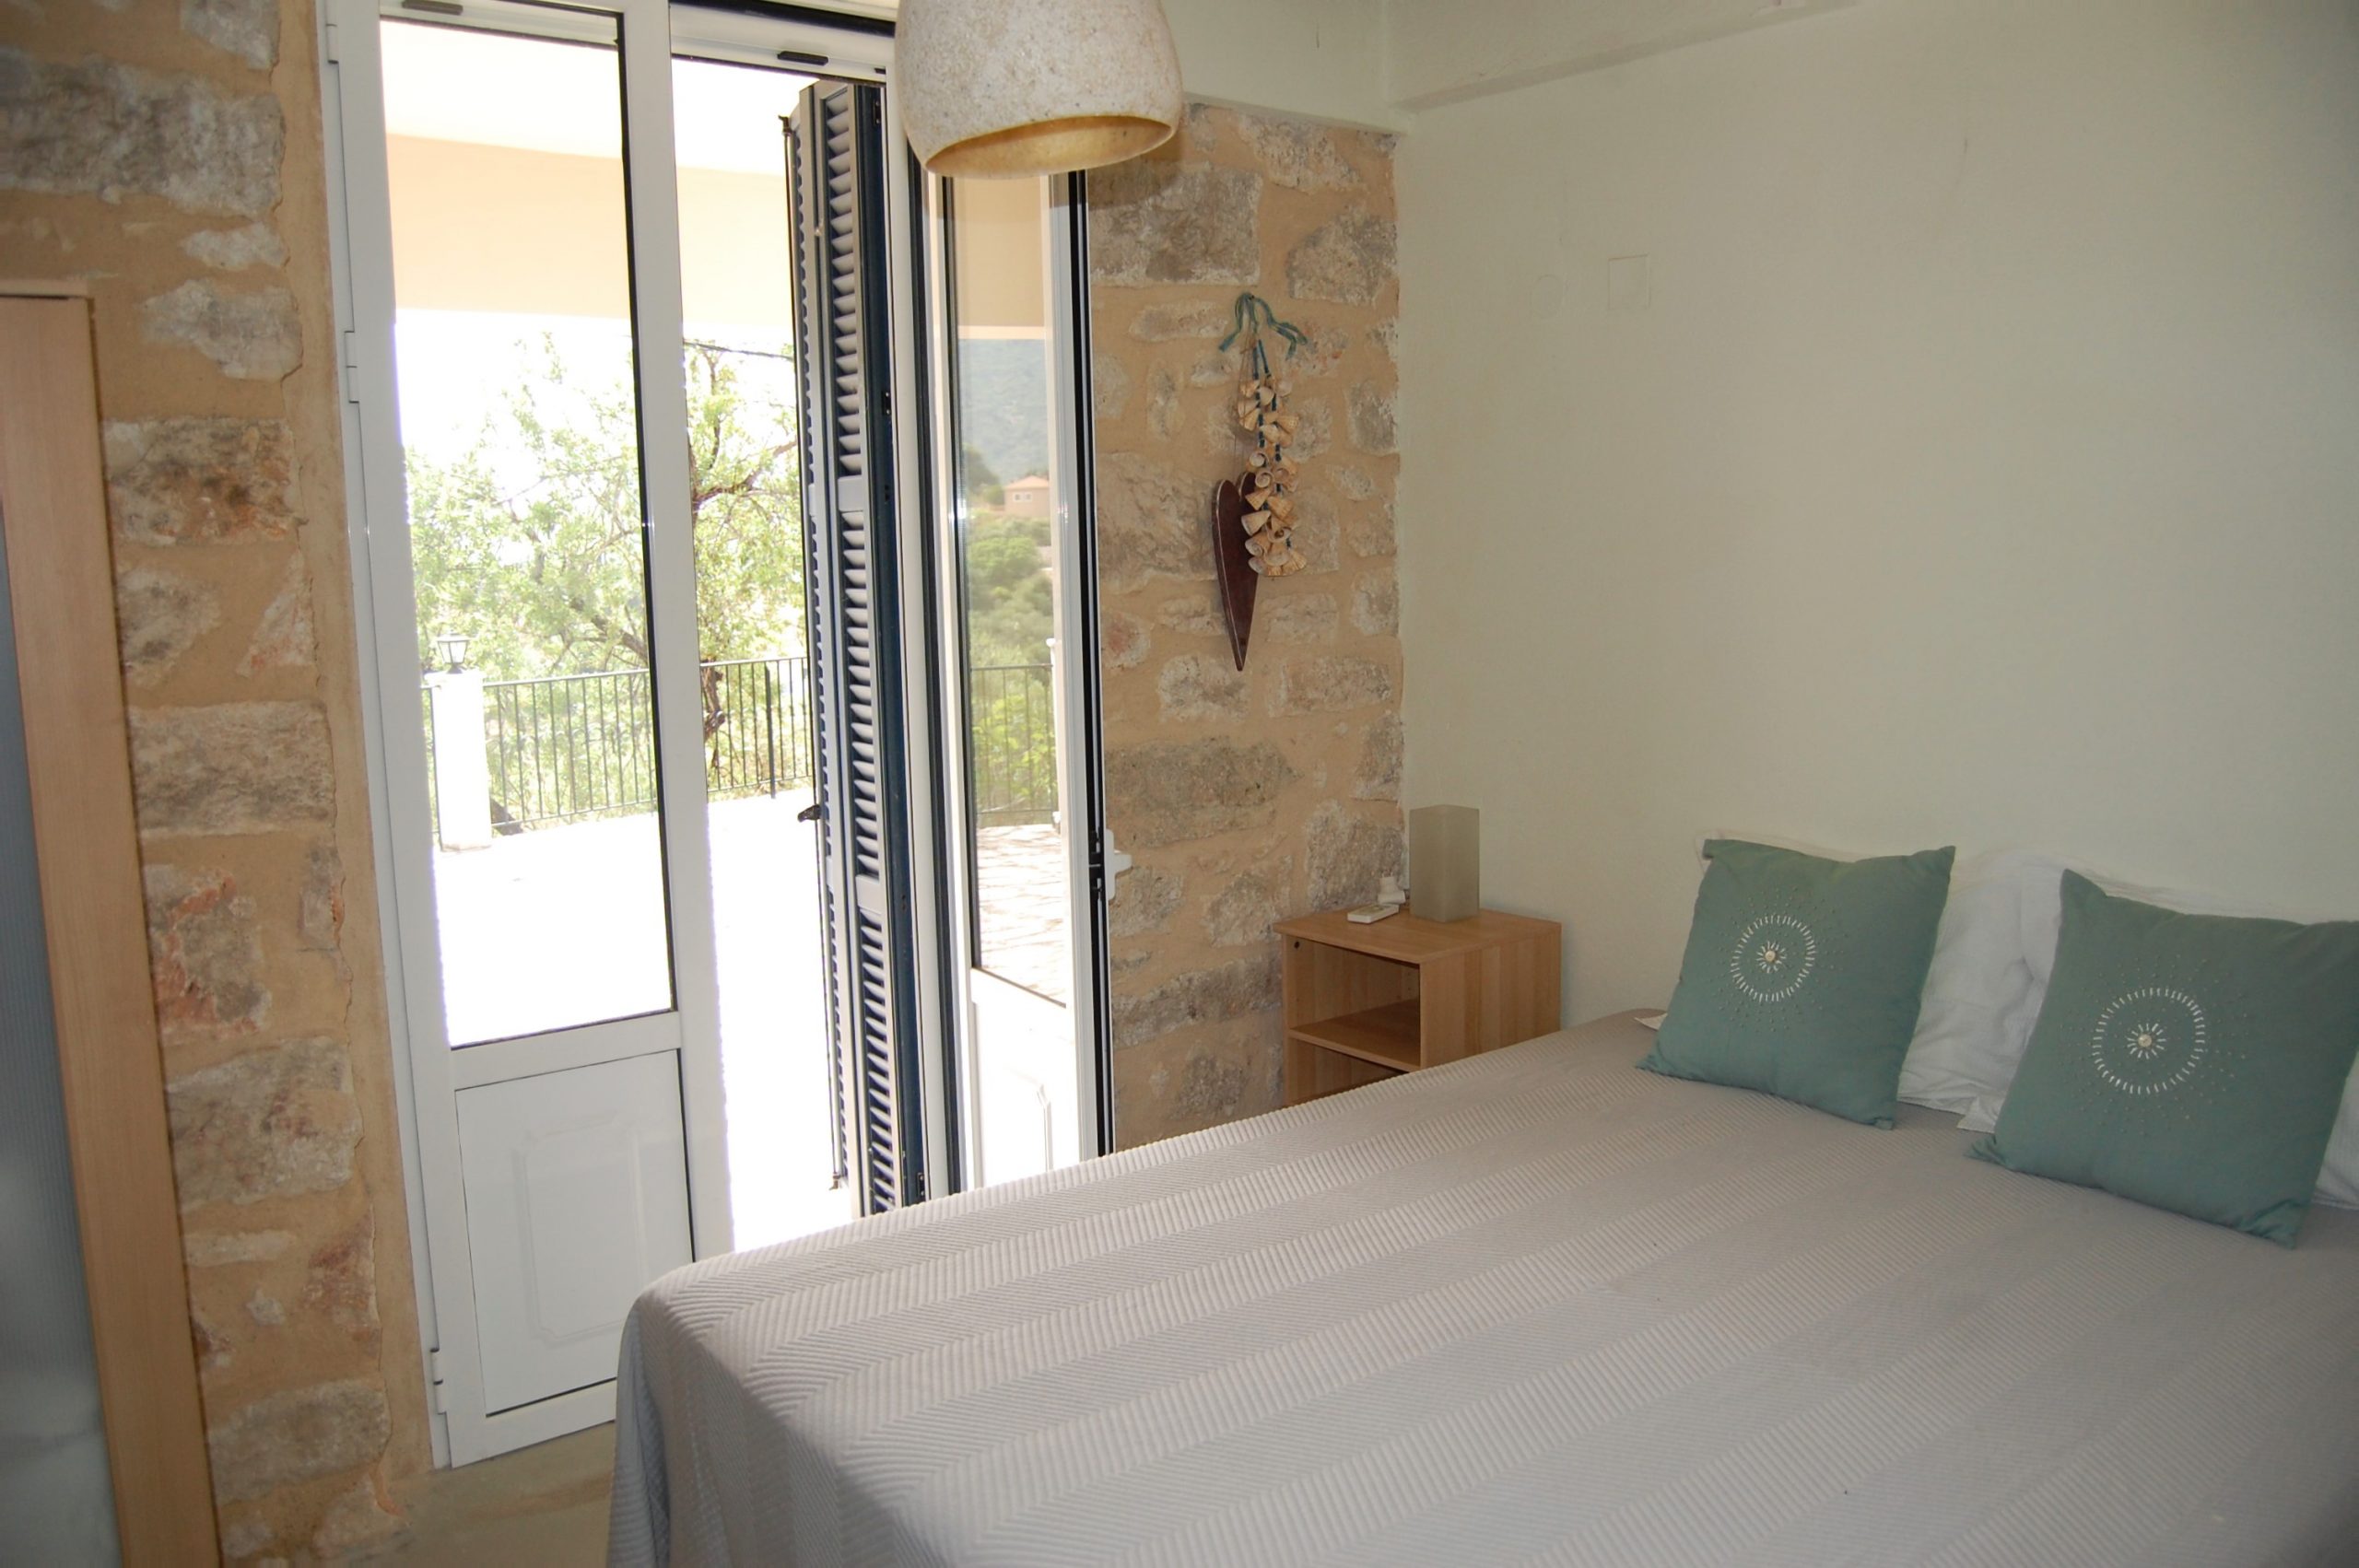 Bedroom of holiday house for rent on Ithaca Greece, kolleri